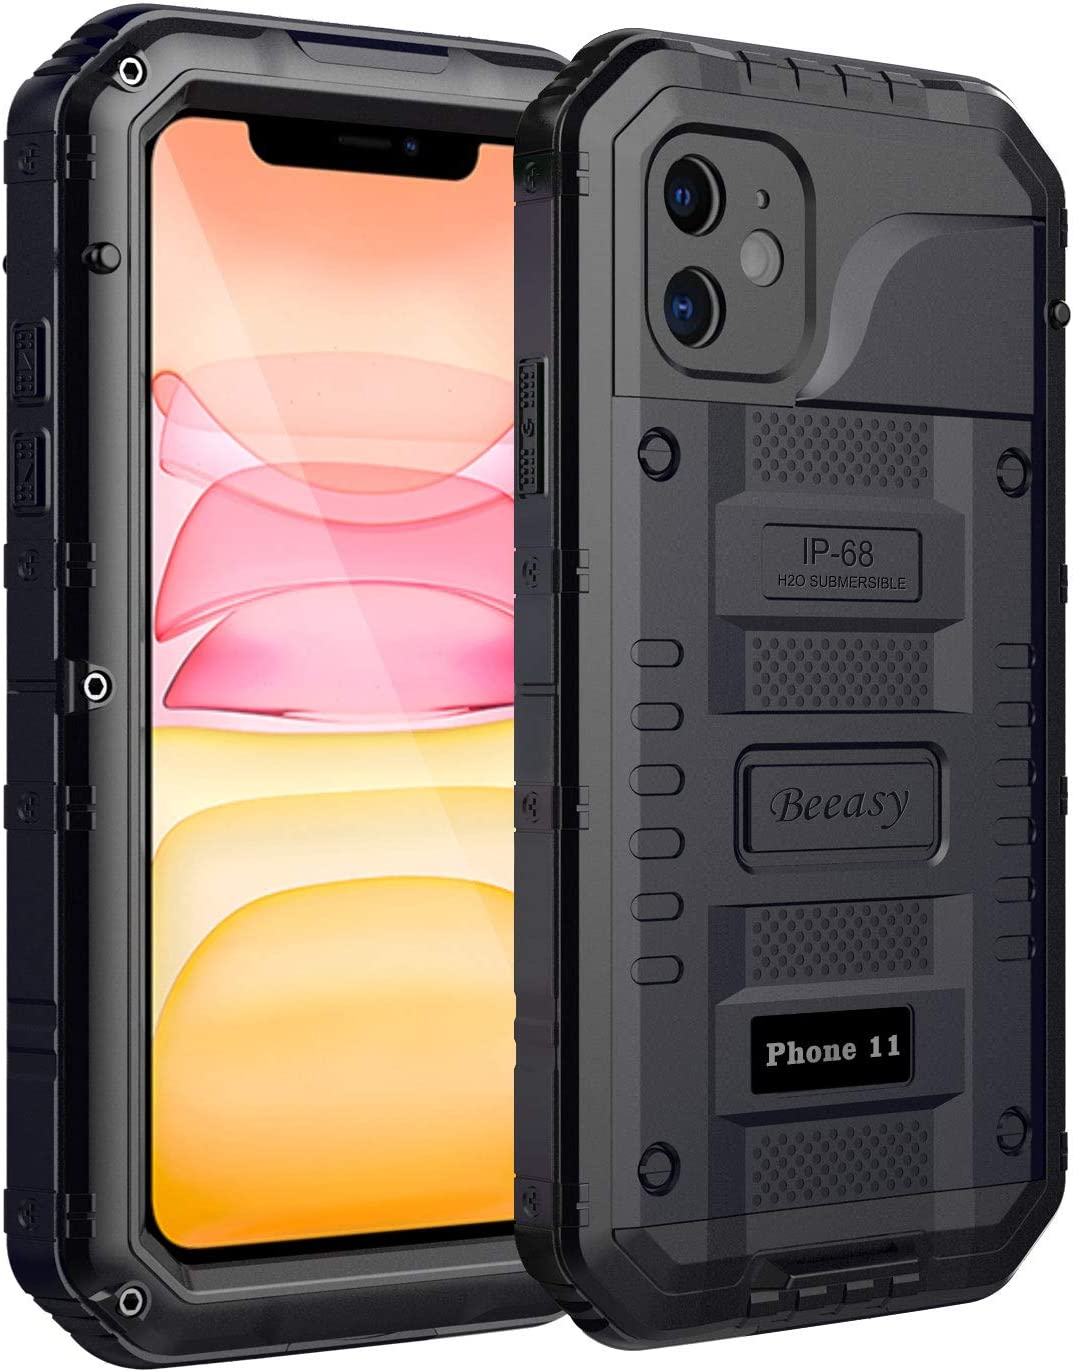 Waterproof iPhone 11 Pro Max Case - iPhone 11 Pro Max Full Body Bumper Case  Waterproof Apple iPhone Rugged Protection Case with Built-in Screen